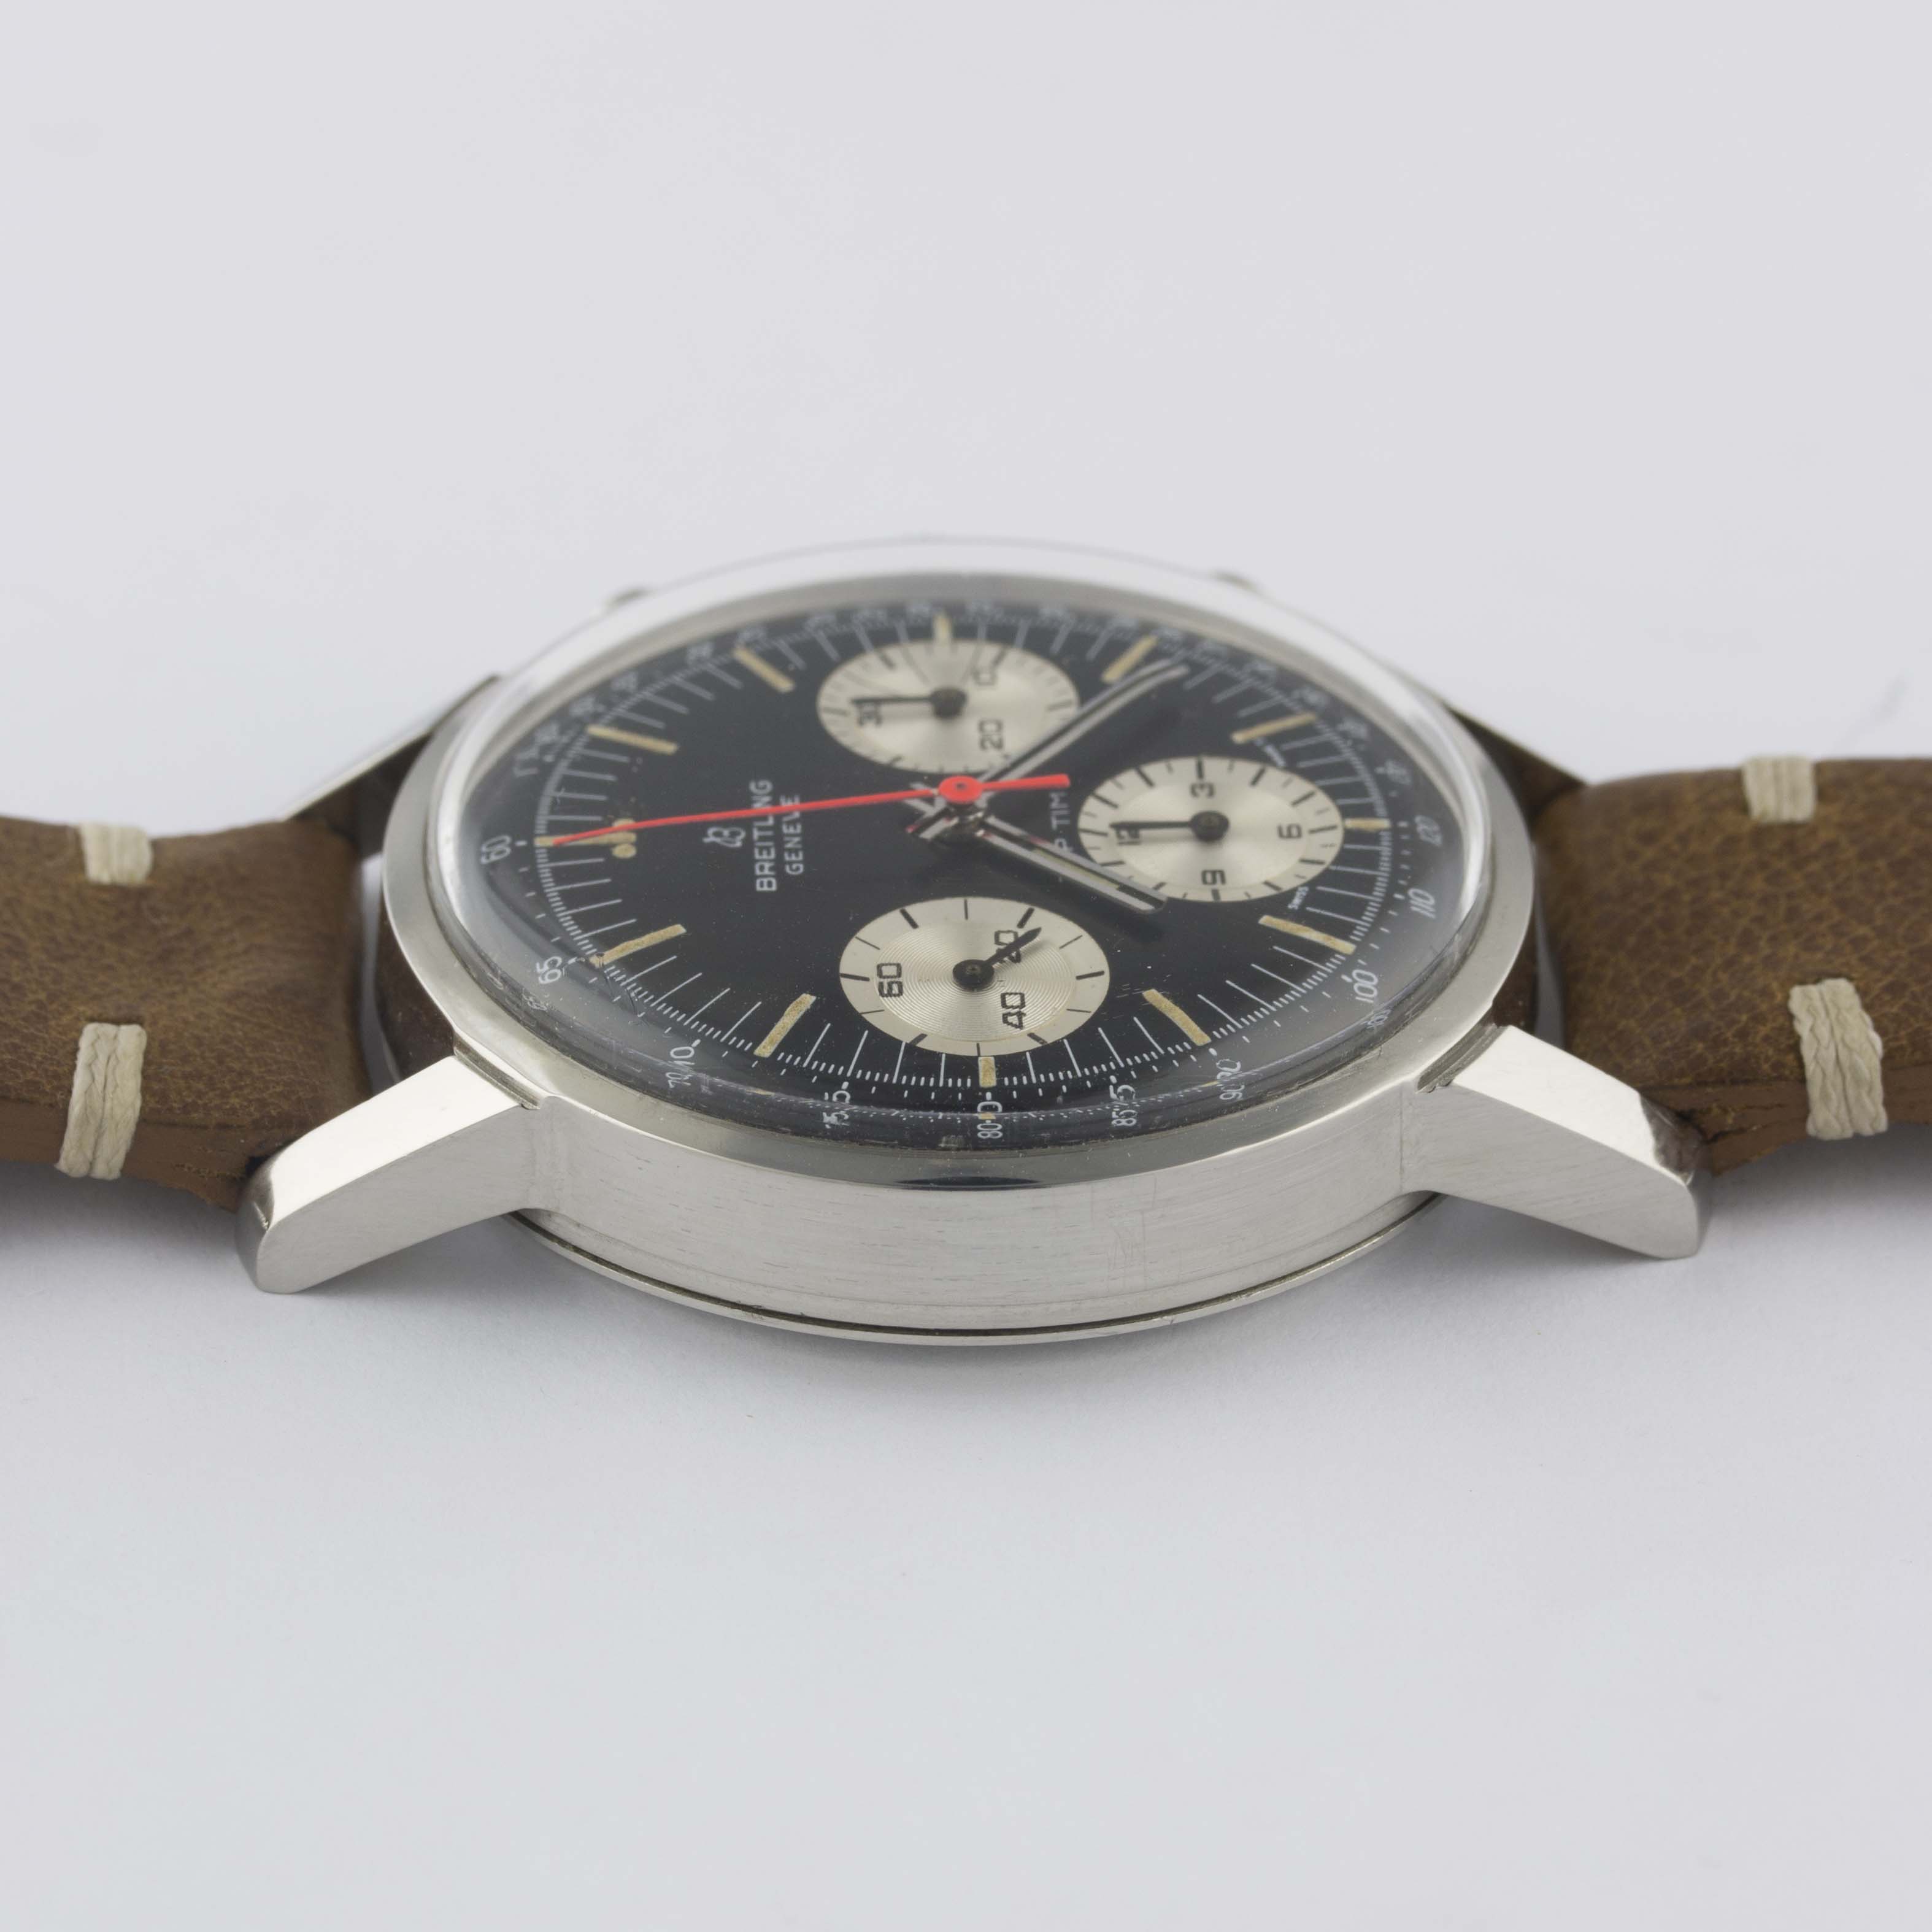 A RARE GENTLEMAN'S STAINLESS STEEL BREITLING TOP TIME CHRONOGRAPH WRIST WATCH CIRCA 1969, REF. 810 - Image 11 of 11